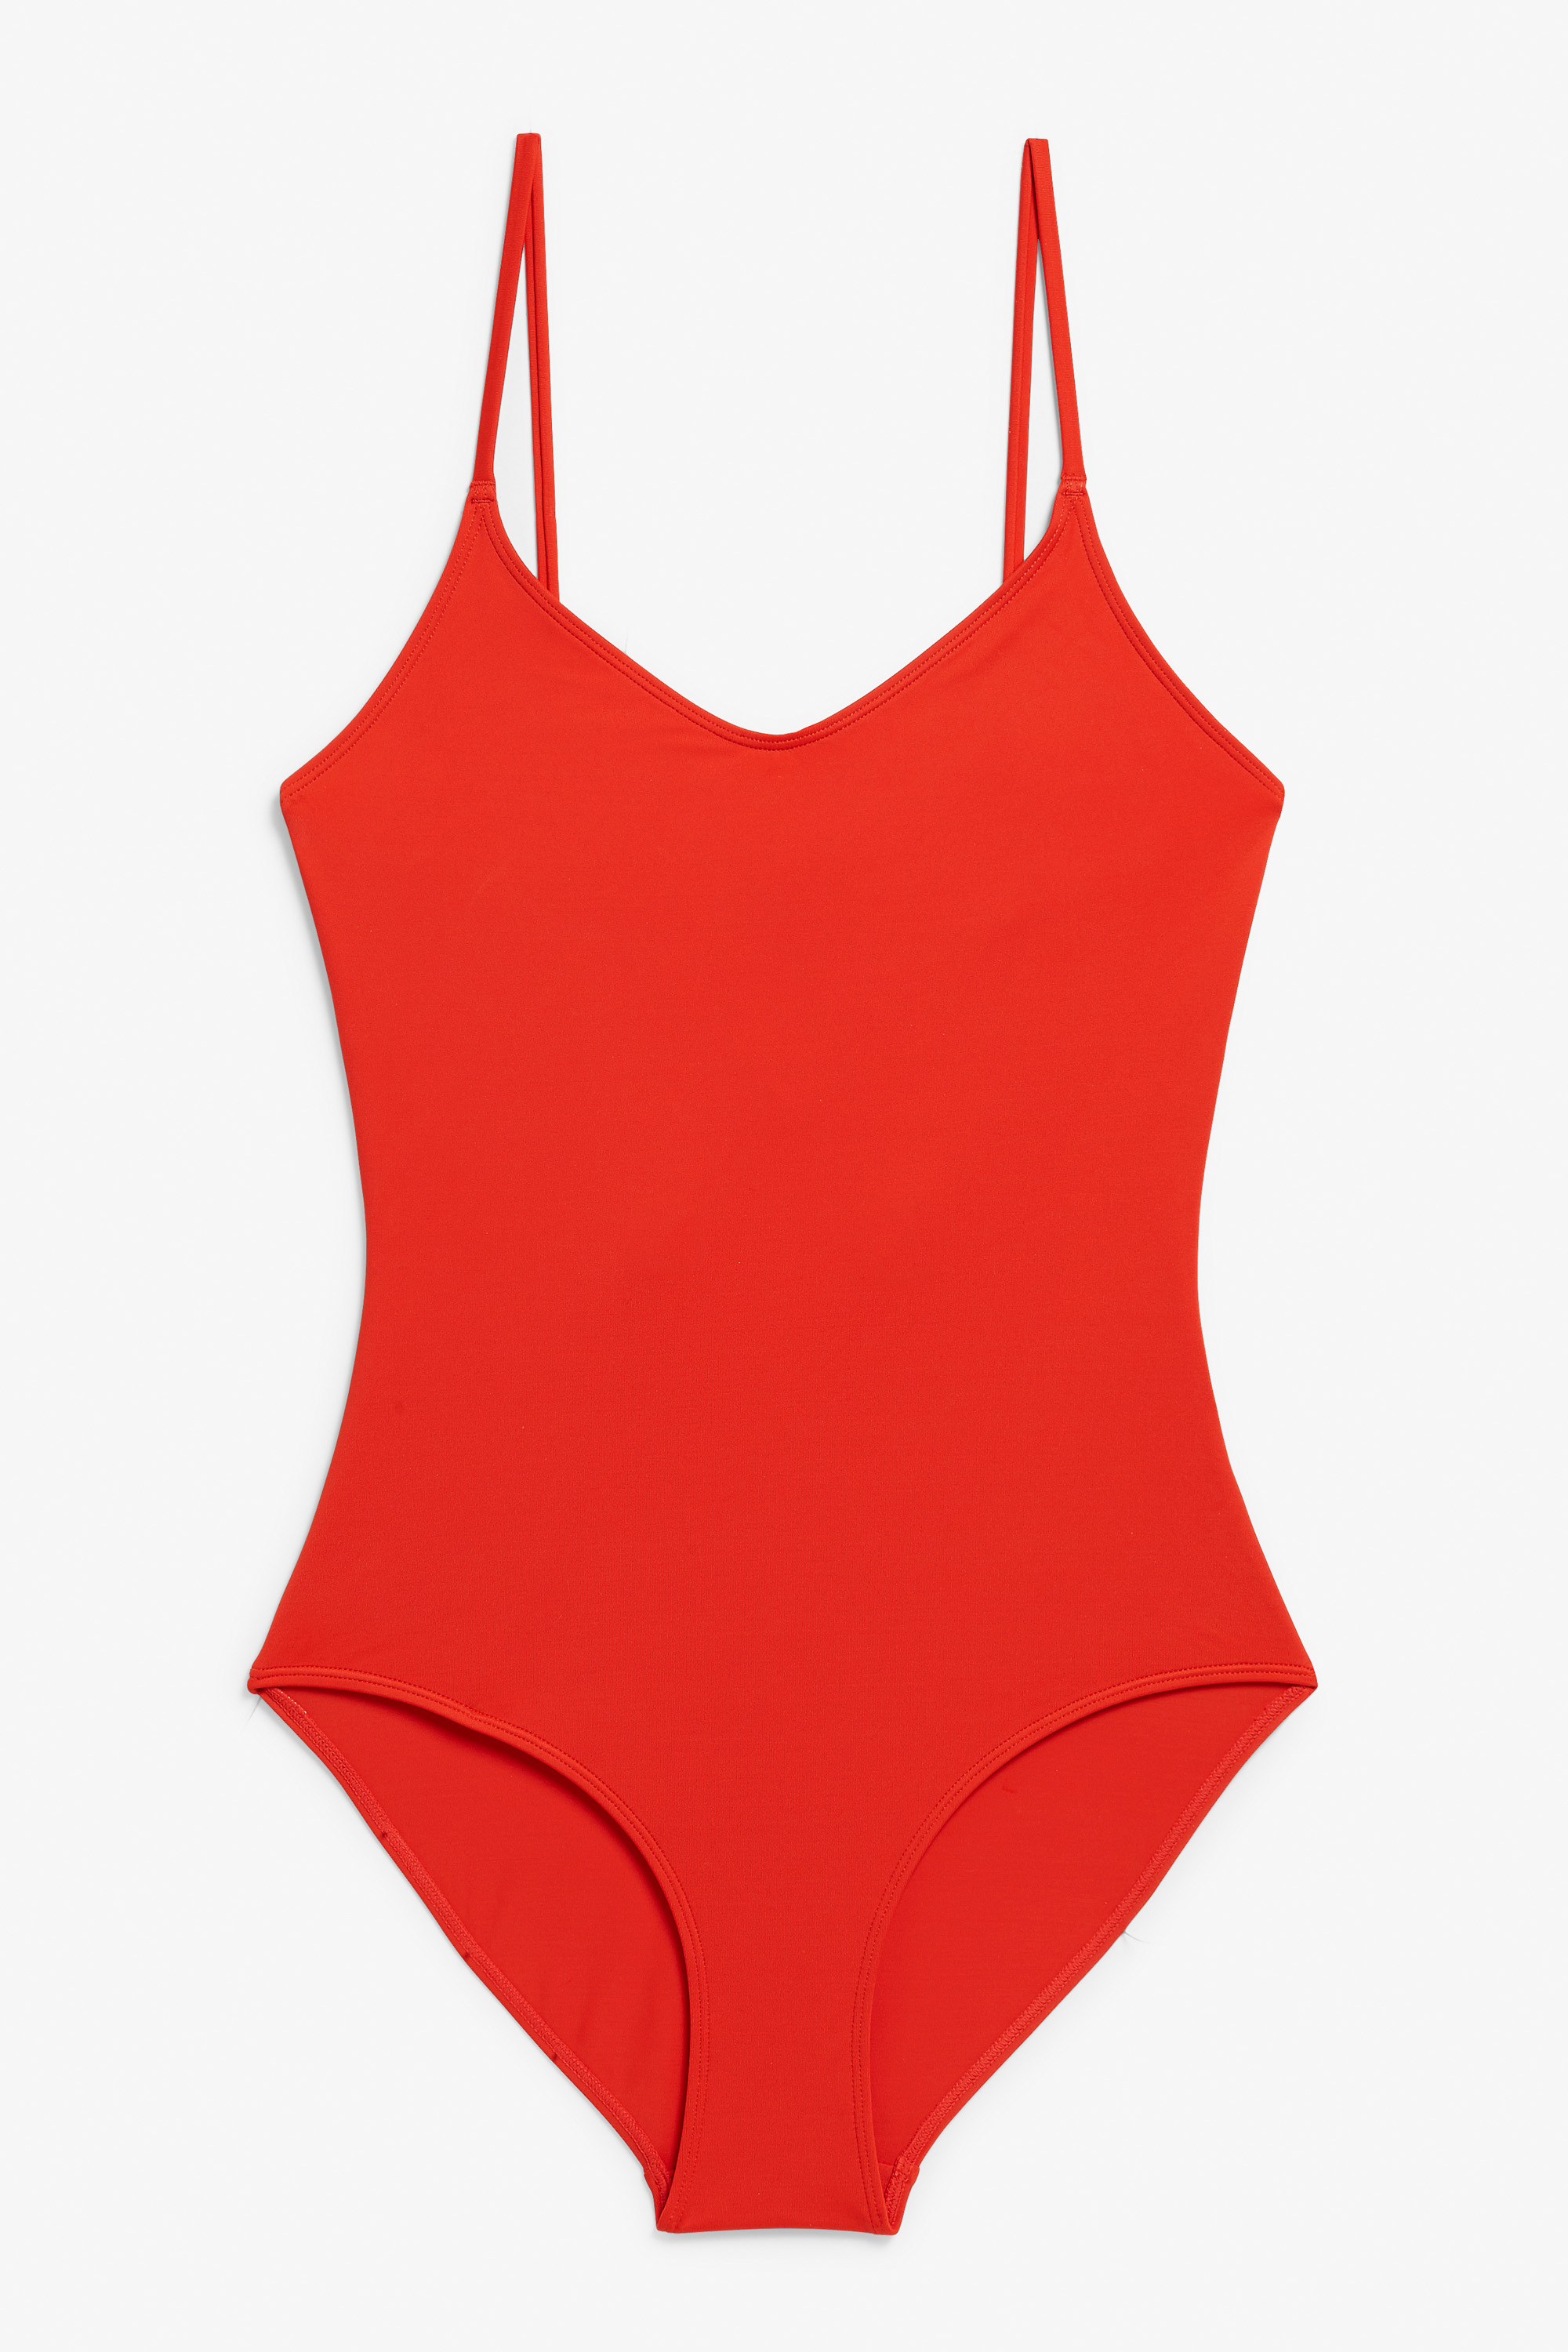 Sustainable Swimwear Made Out Of Plastic Bottles? Monki Did That!